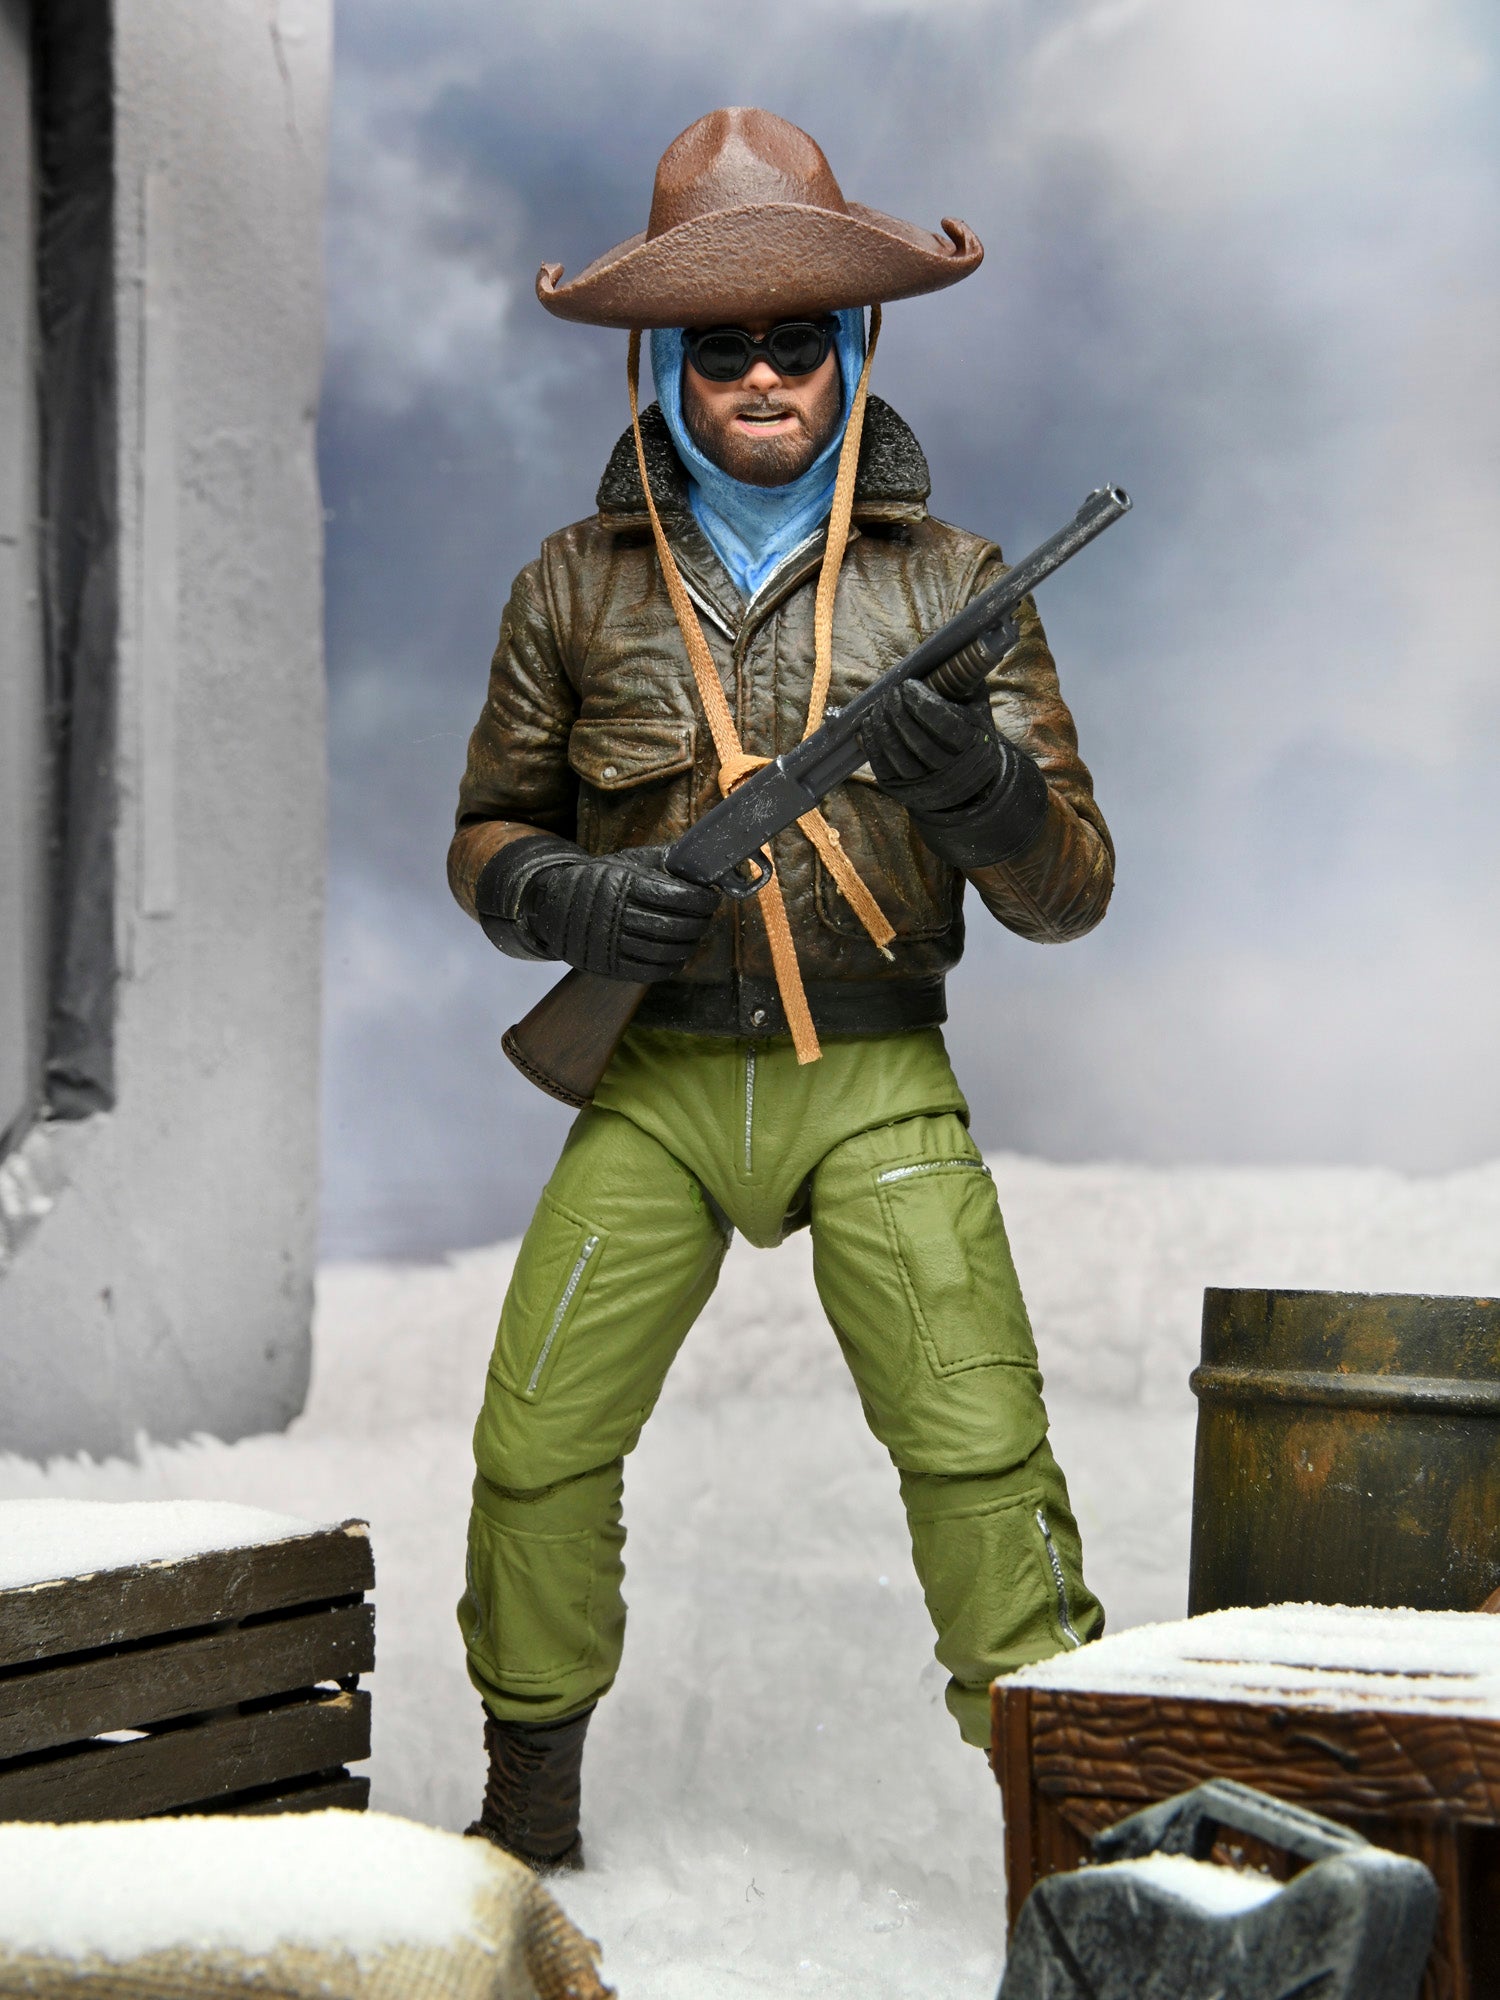 NECA - The Thing - 7" Scale Action Figure - Ultimate Macready (Outpost 31) - costumes.com